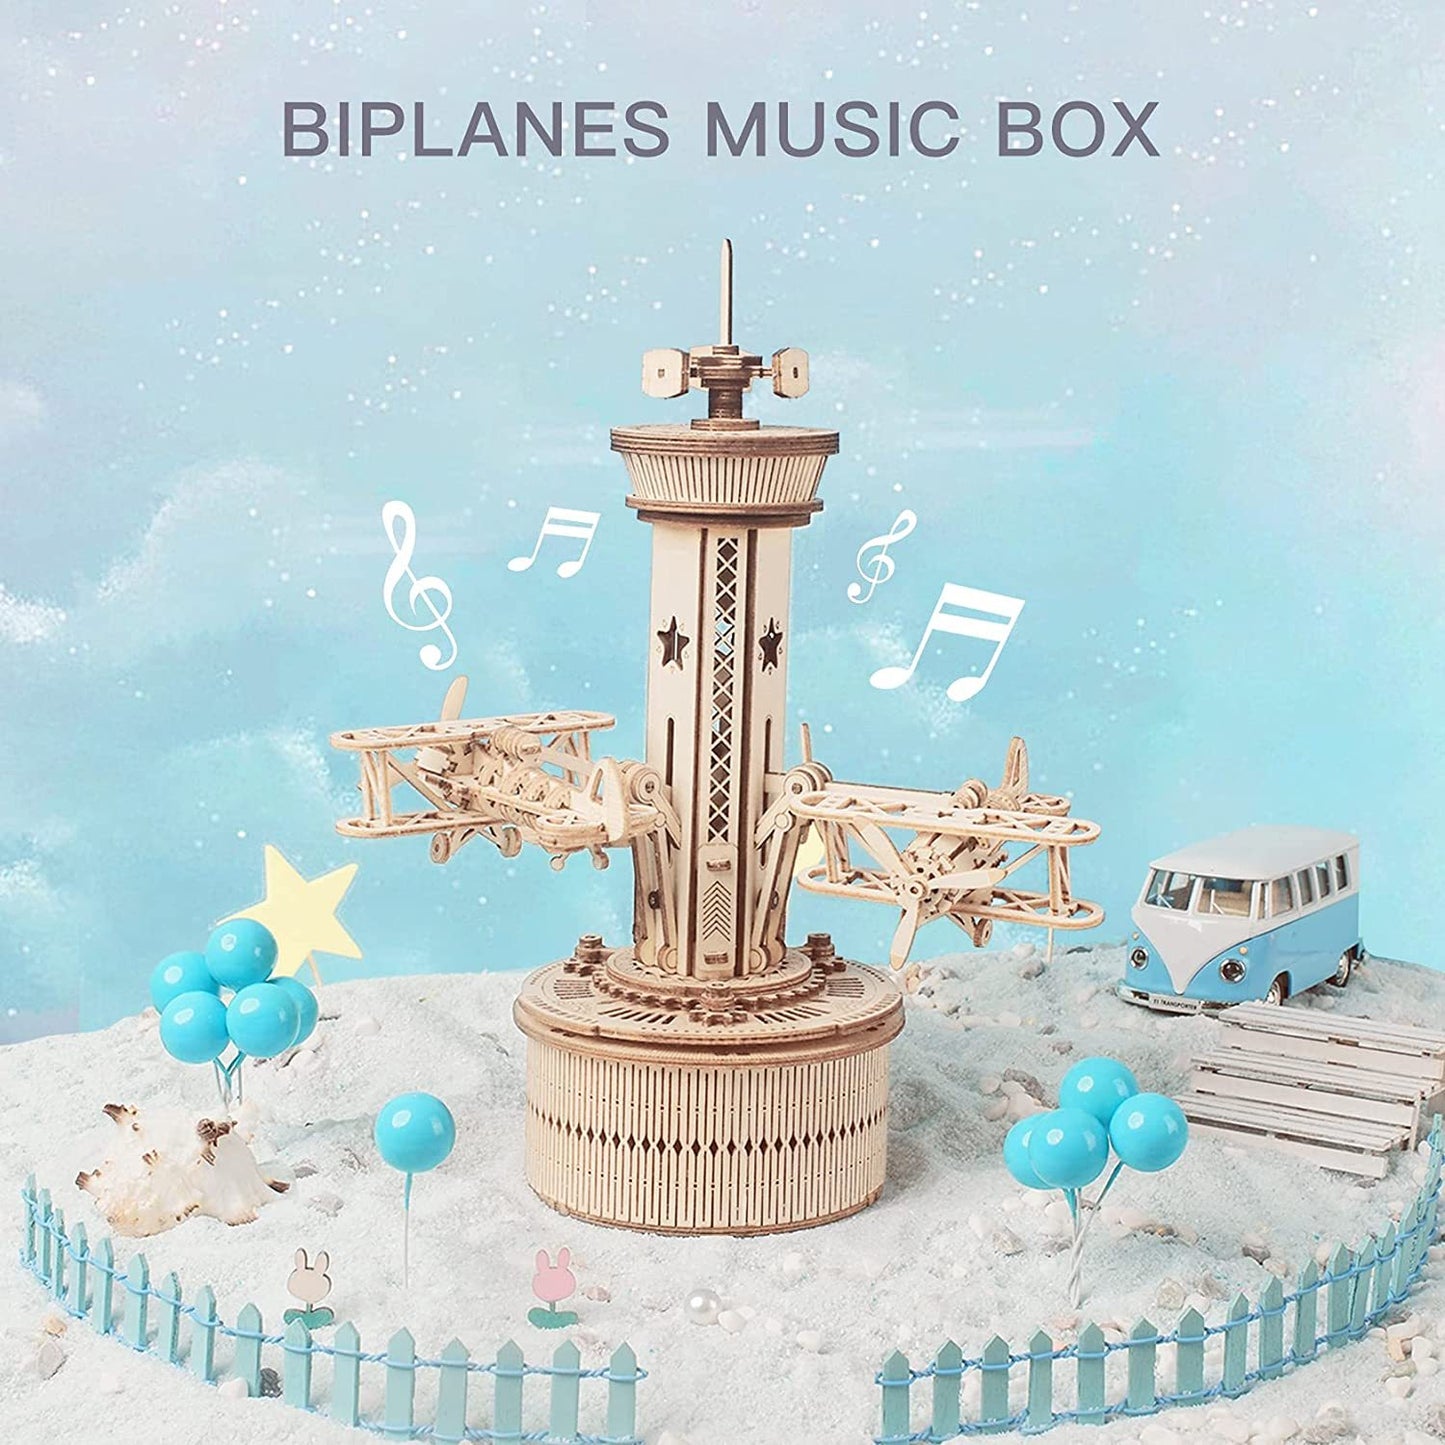 3D Wooden Puzzles For Adults DIY Musical Box Model Kit To Build Self-Assembly Building Kit Airplane- Control Tower